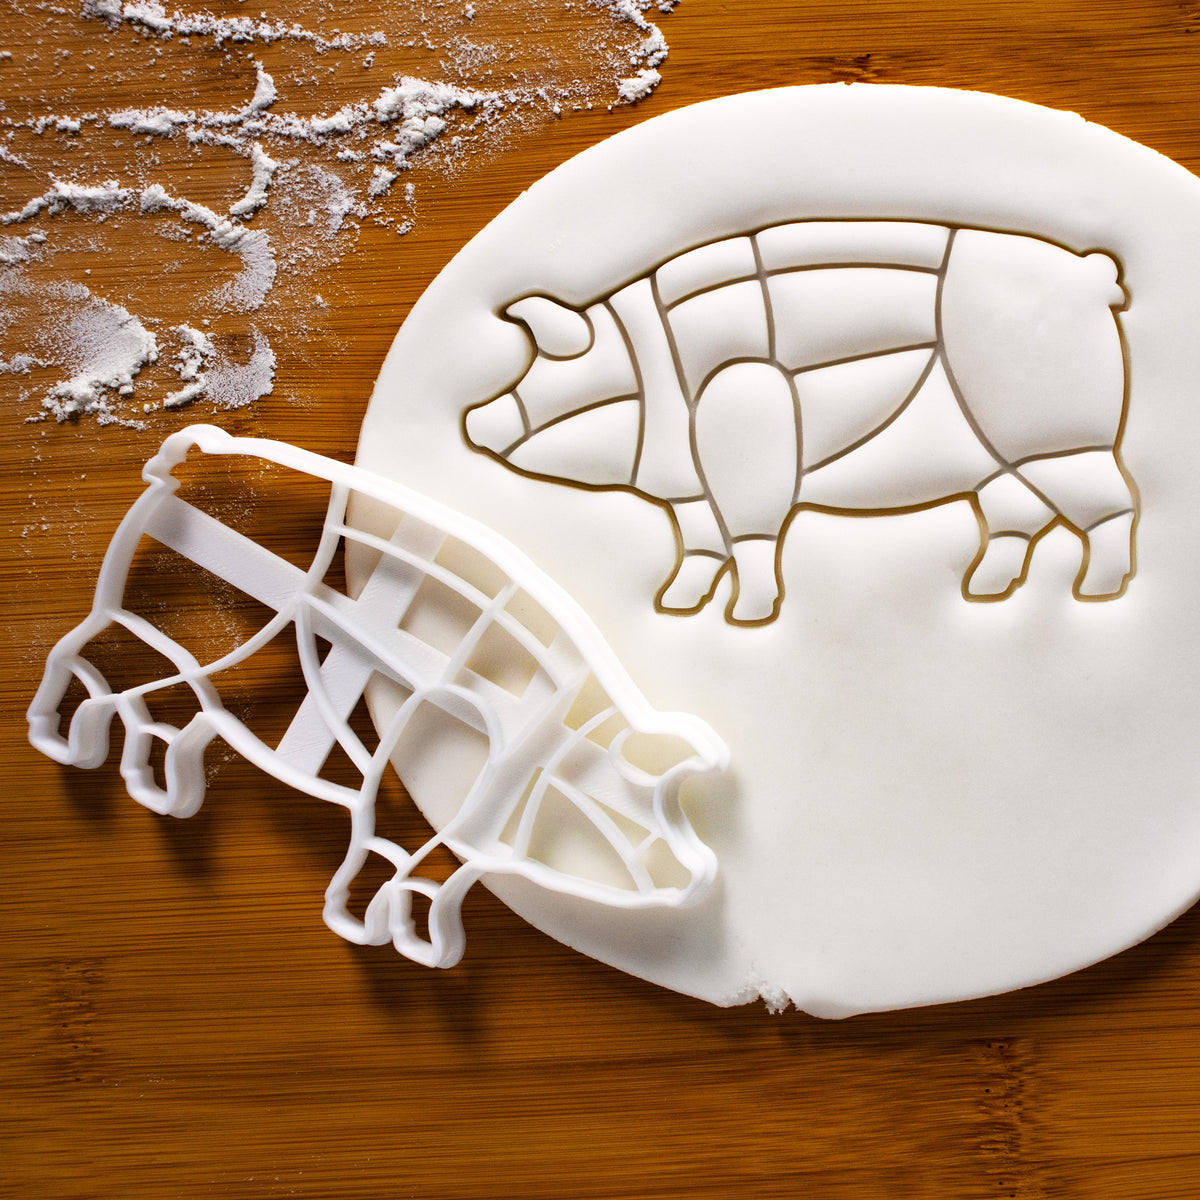 Butcher's Pig Chart cookie cutter pressed on fondant